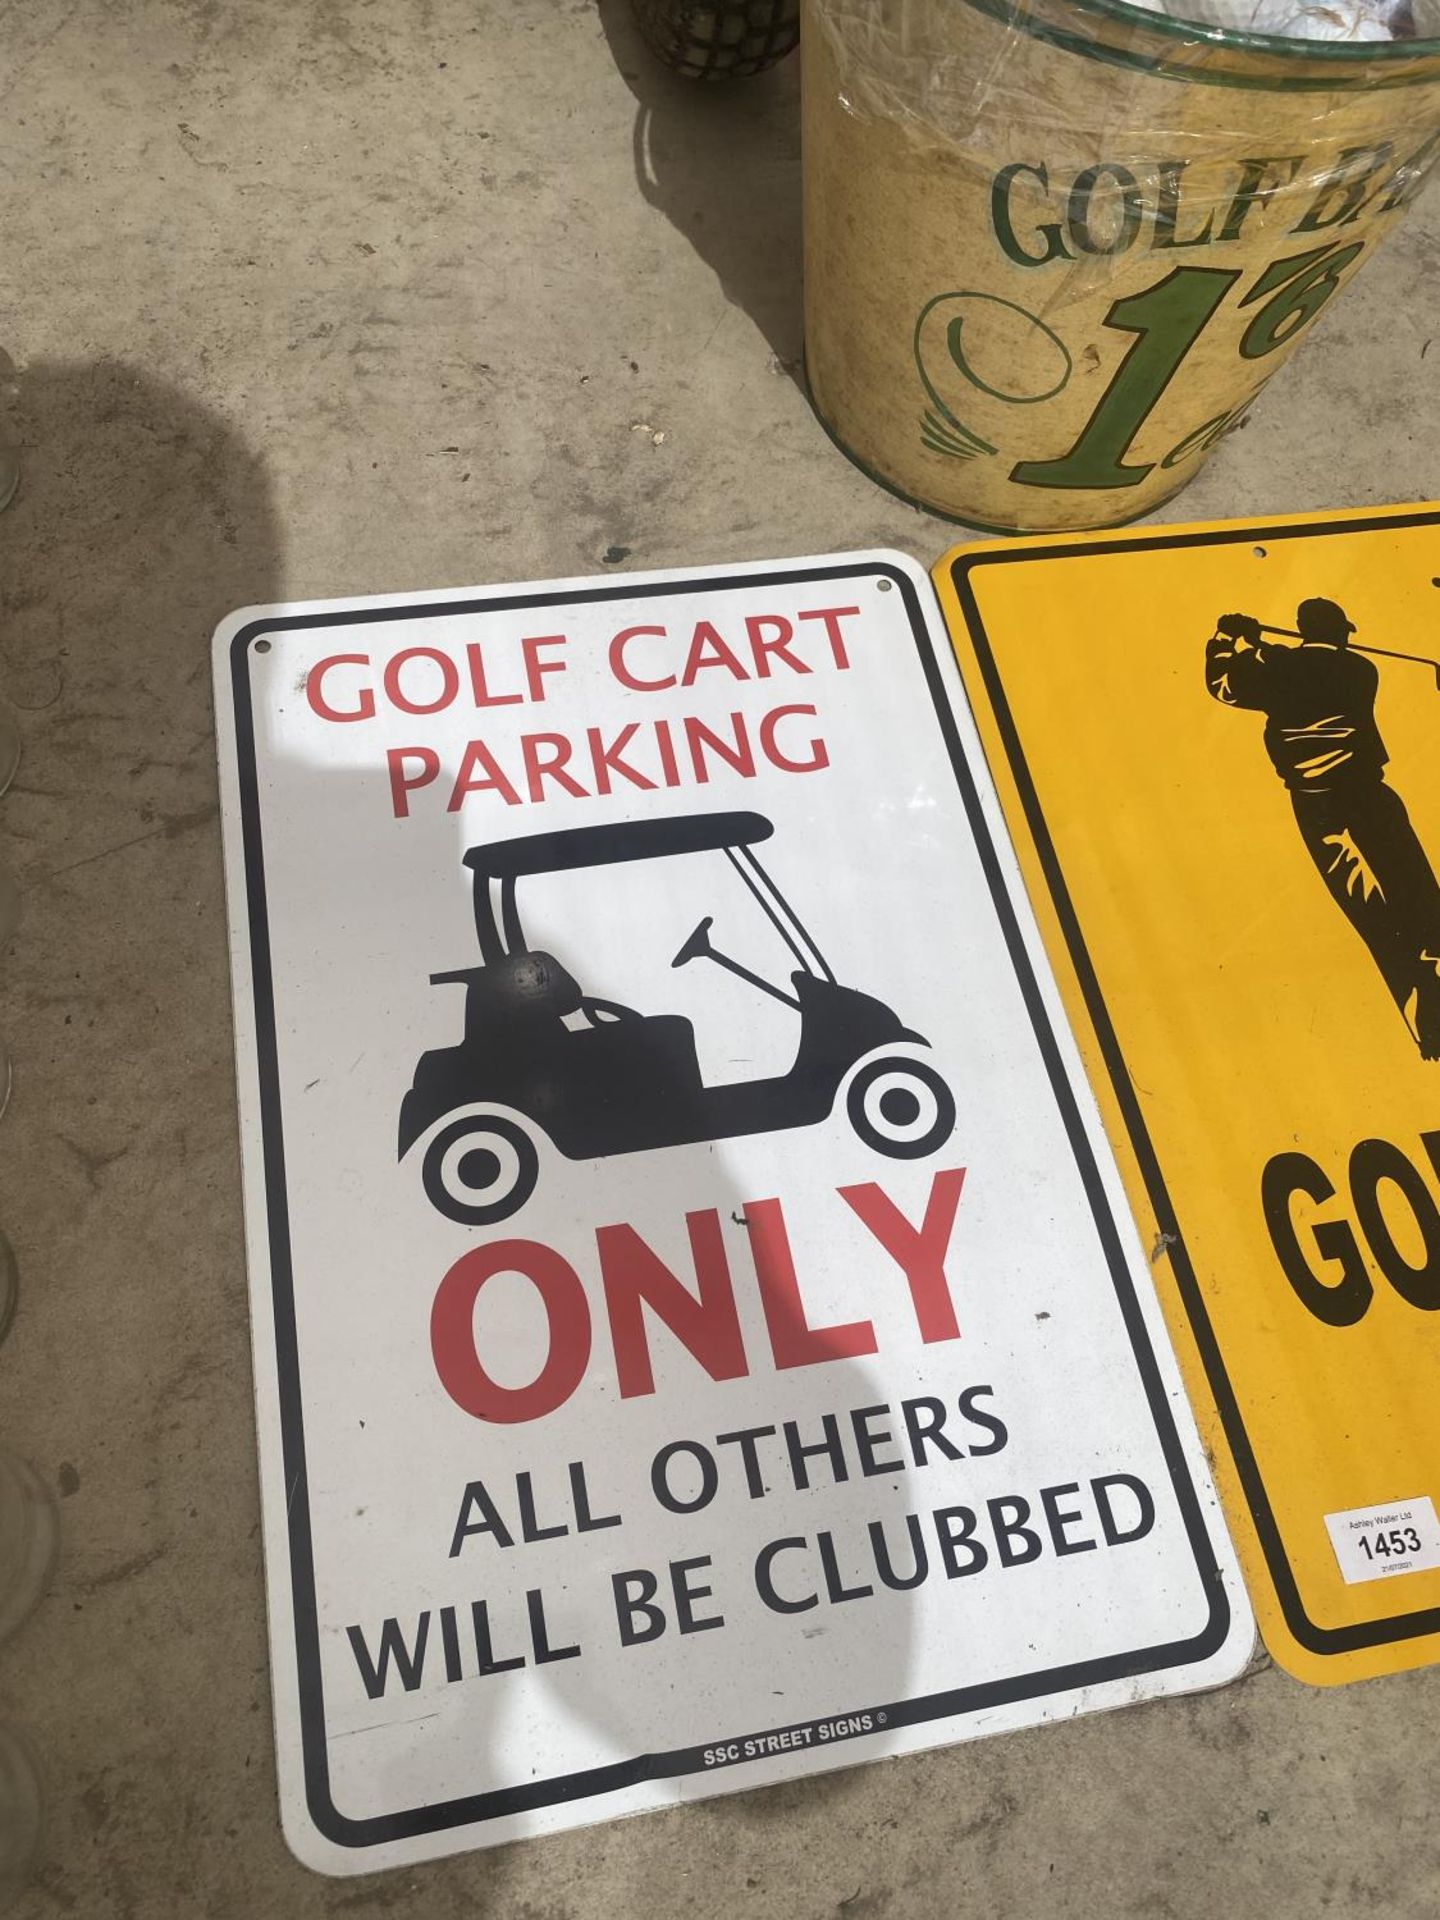 A LARGE QUANTITY OF GOLF BALLS, TWO GOLF RELATED SIGNS AND A GOLF BUCKET - Image 2 of 4